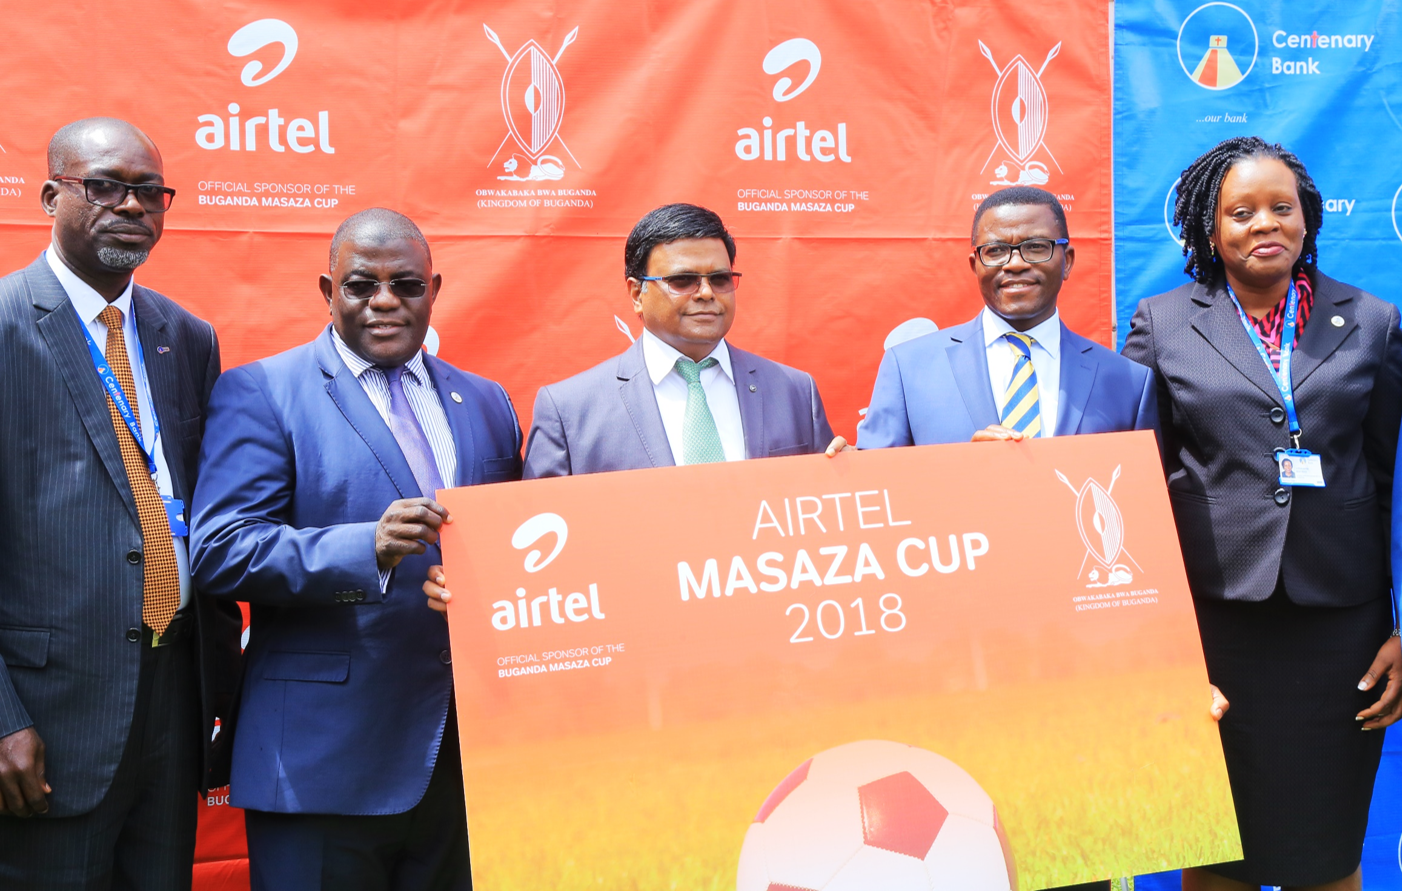 Airtel Uganda Sponsors Masaza Cup For the Second Year